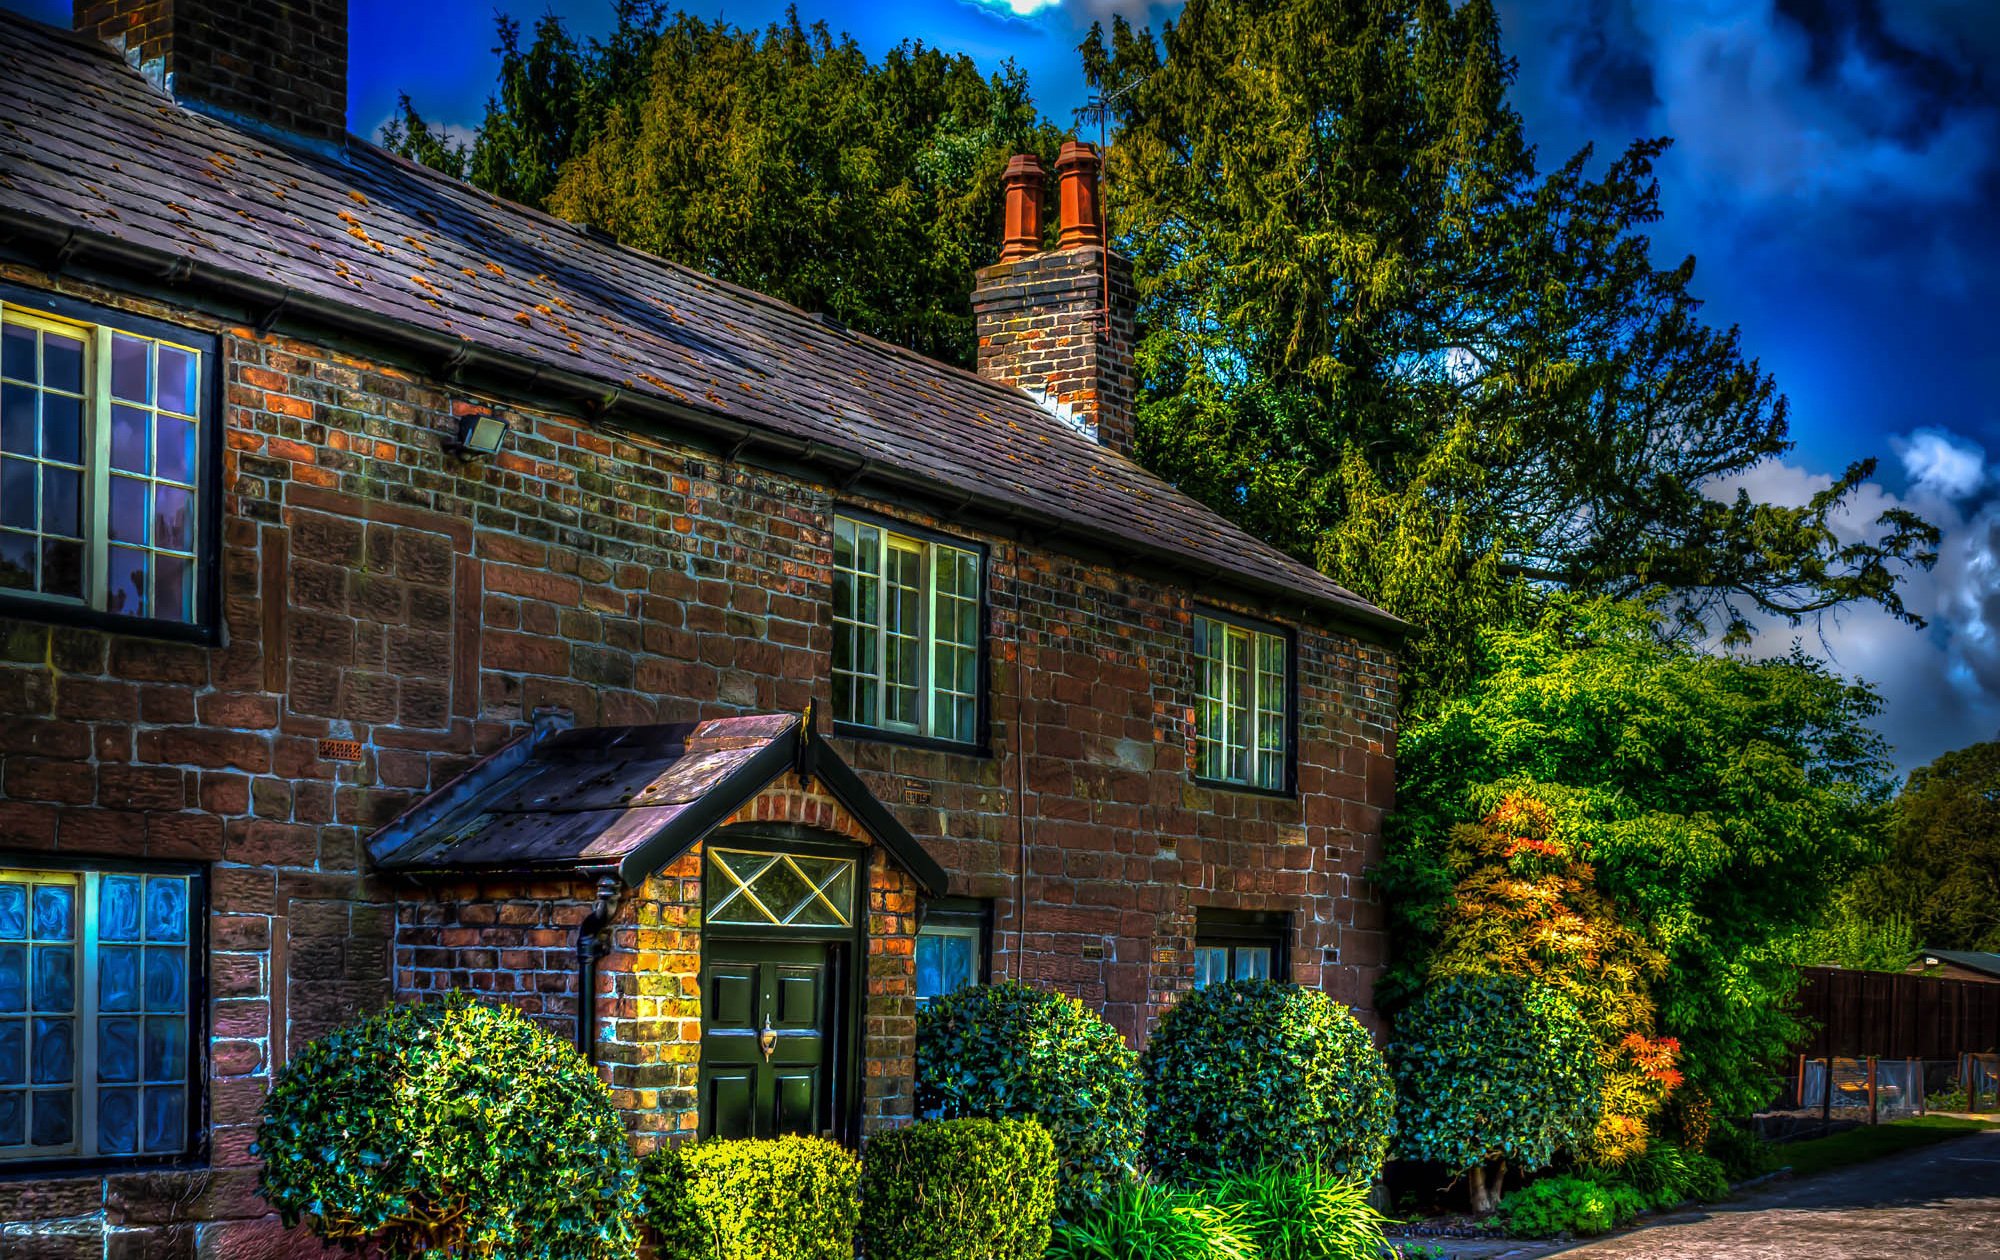 england, Houses, Hdr, Trees, Shrubs, Liverpool, Cities Wallpaper